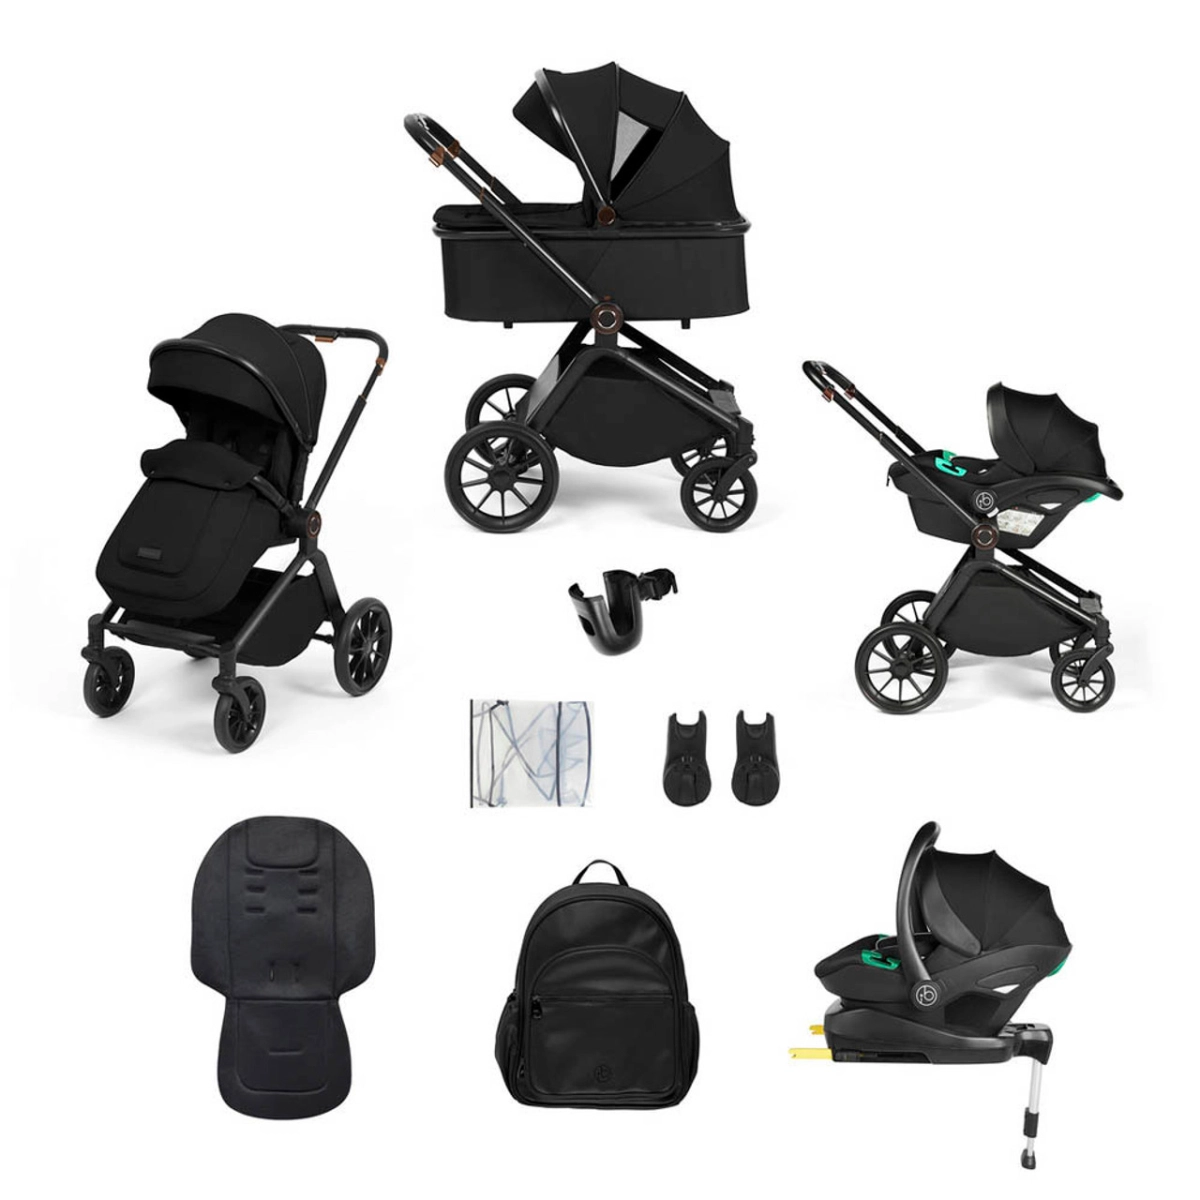 Ickle Bubba Altima Black Frame Travel System with Stratus i-Size Car Seat & Isofix Base